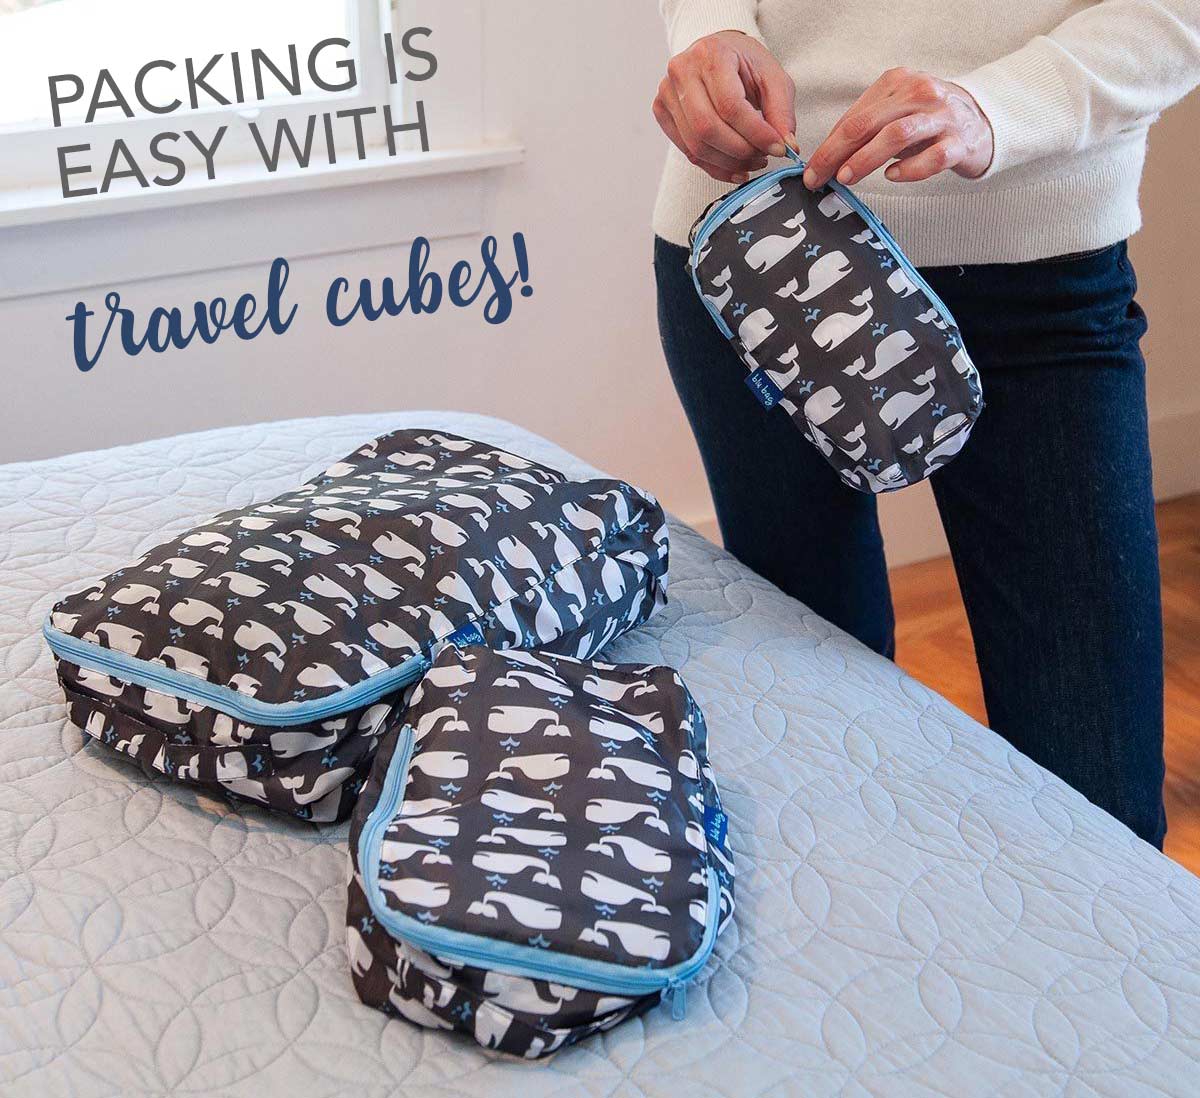 three travel cubes in a whale print make packing easy